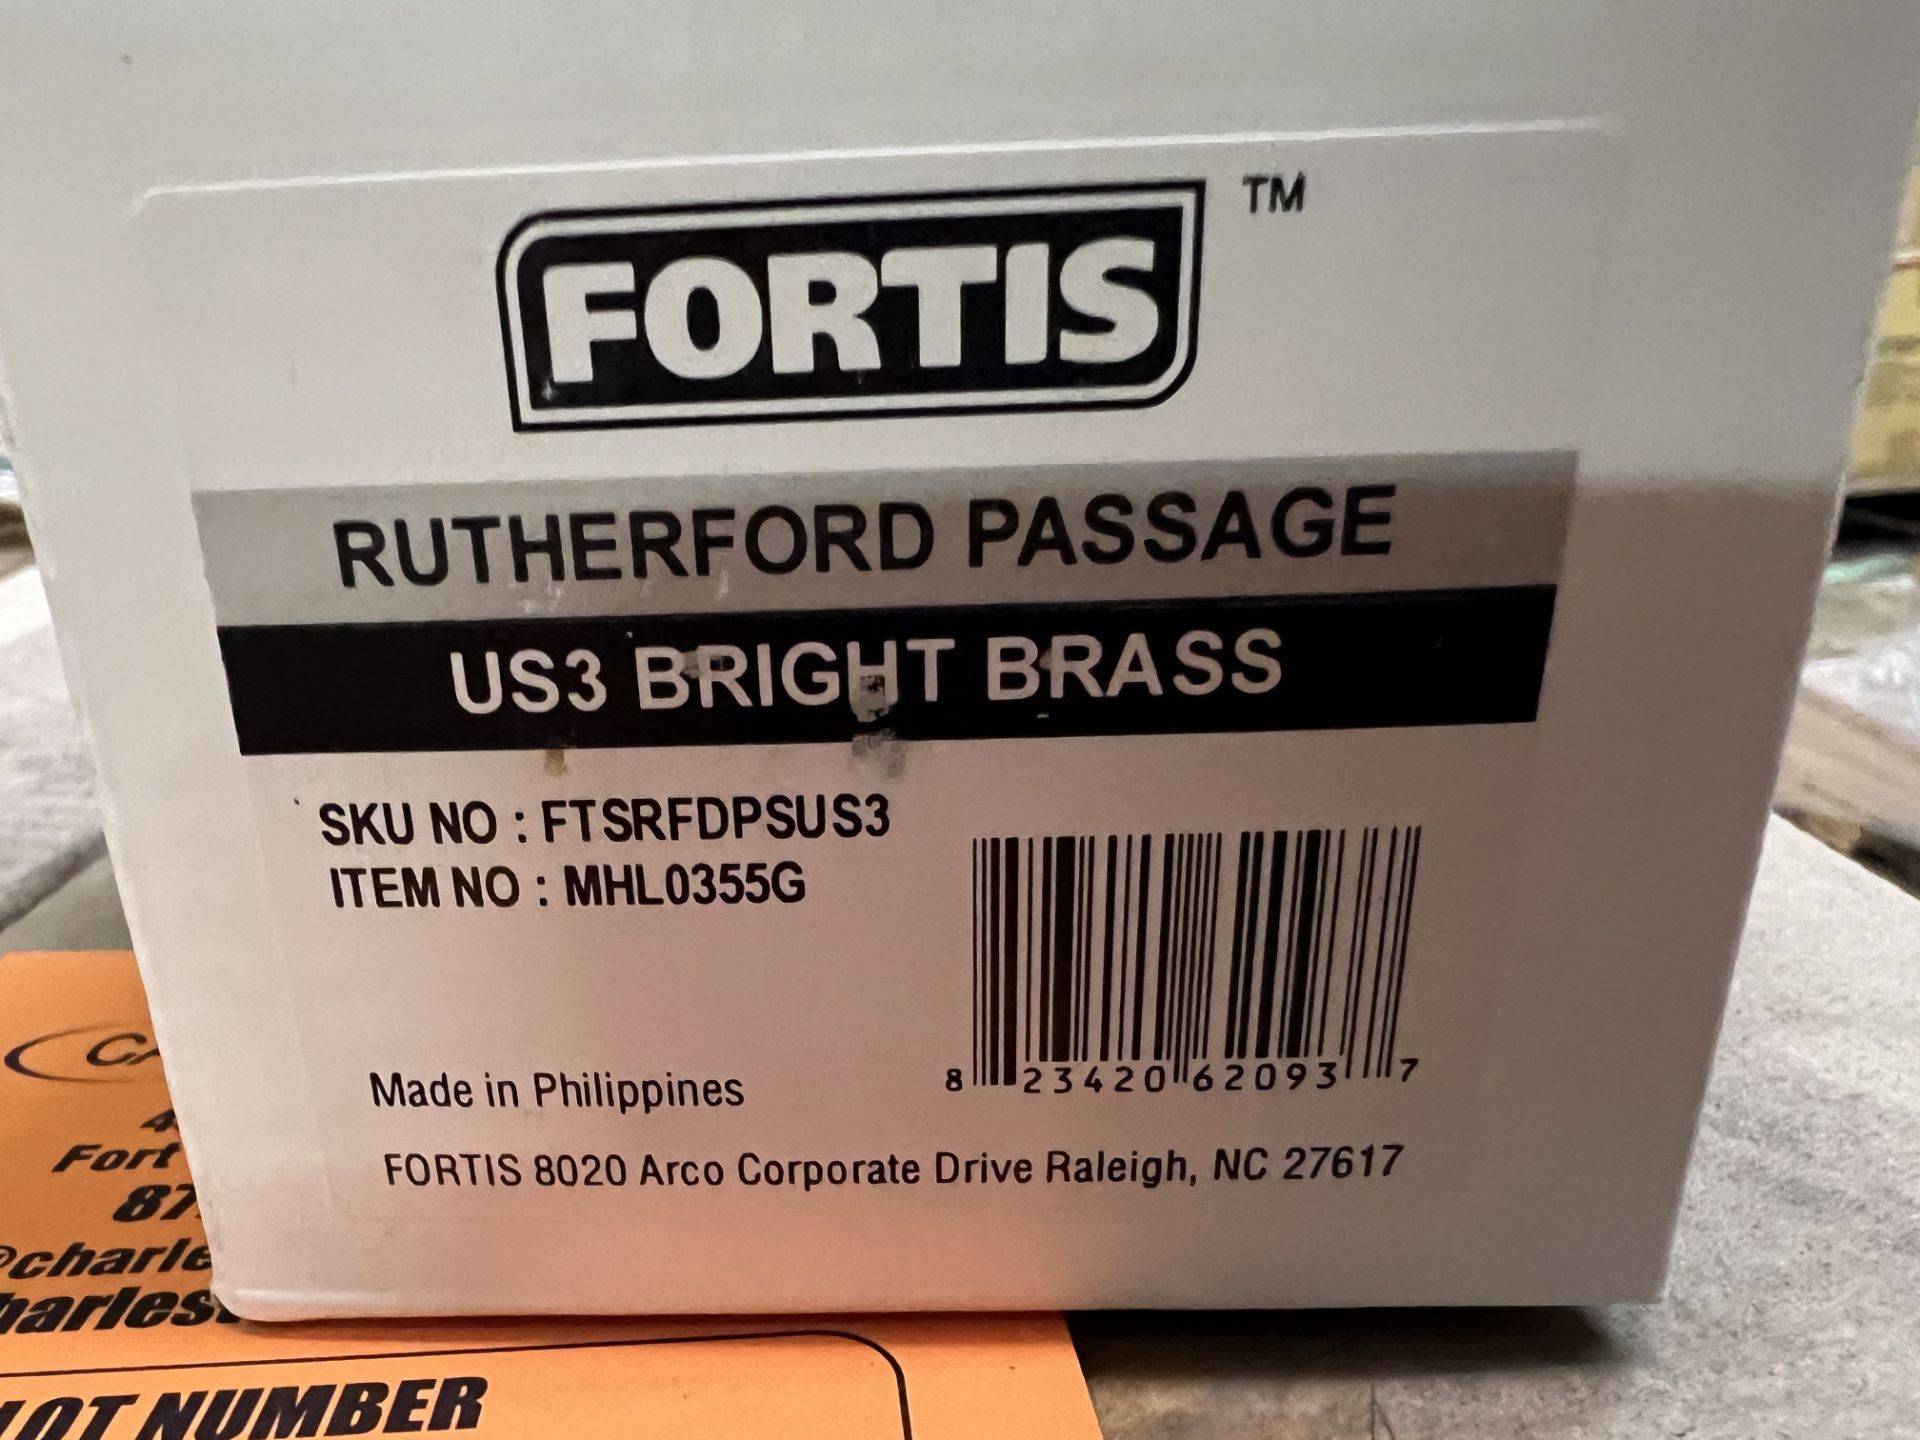 (20) FORTIS RUTHERFORD PASSAGE US3 BRIGHT BRASS - Image 3 of 3